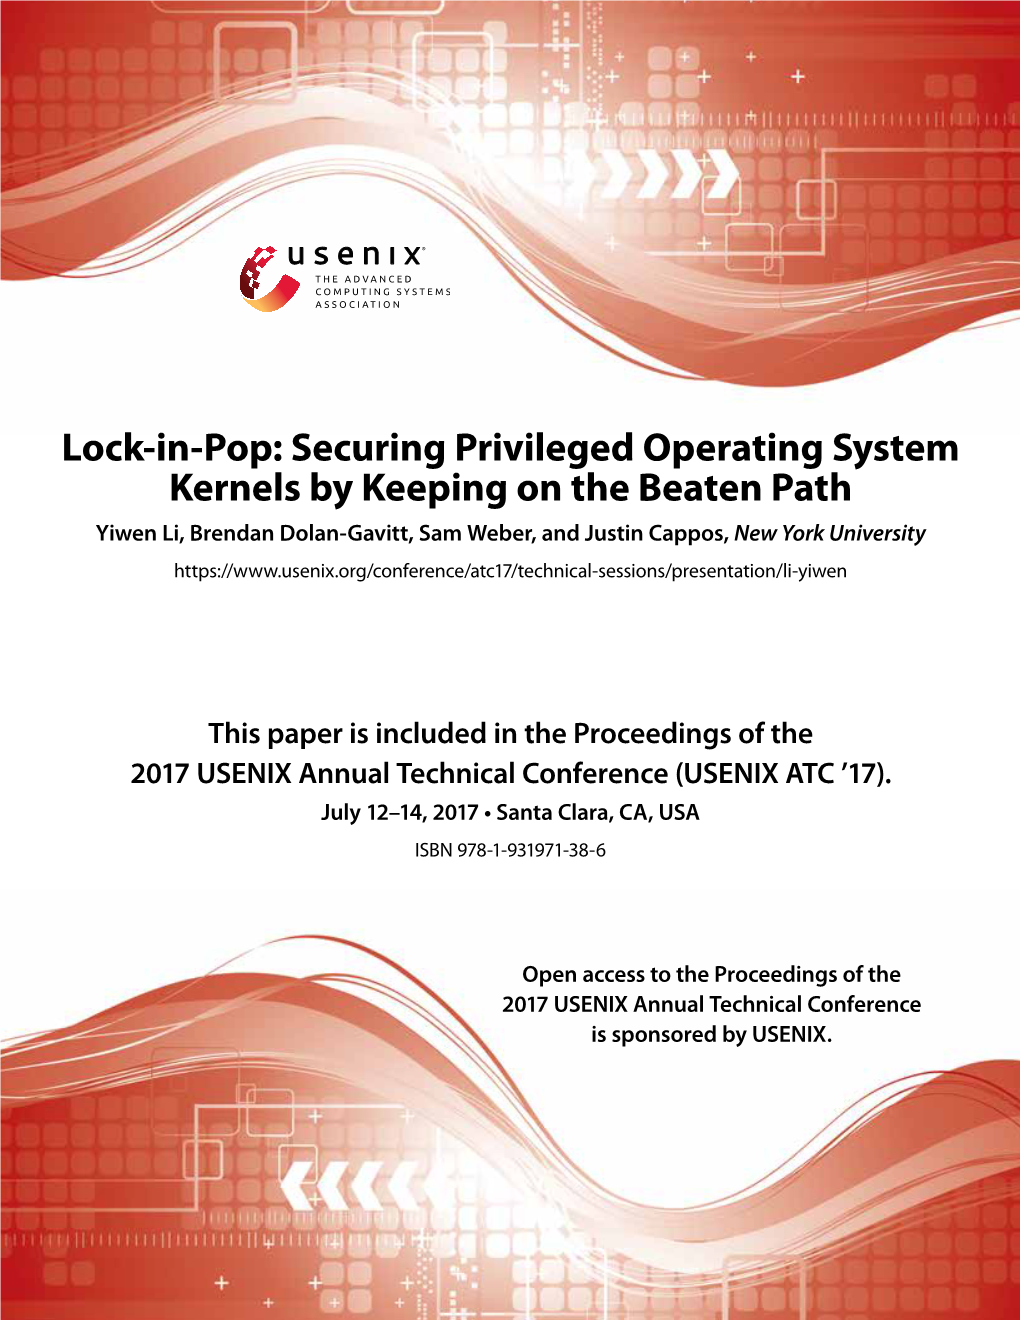 Lock-In-Pop: Securing Privileged Operating System Kernels By